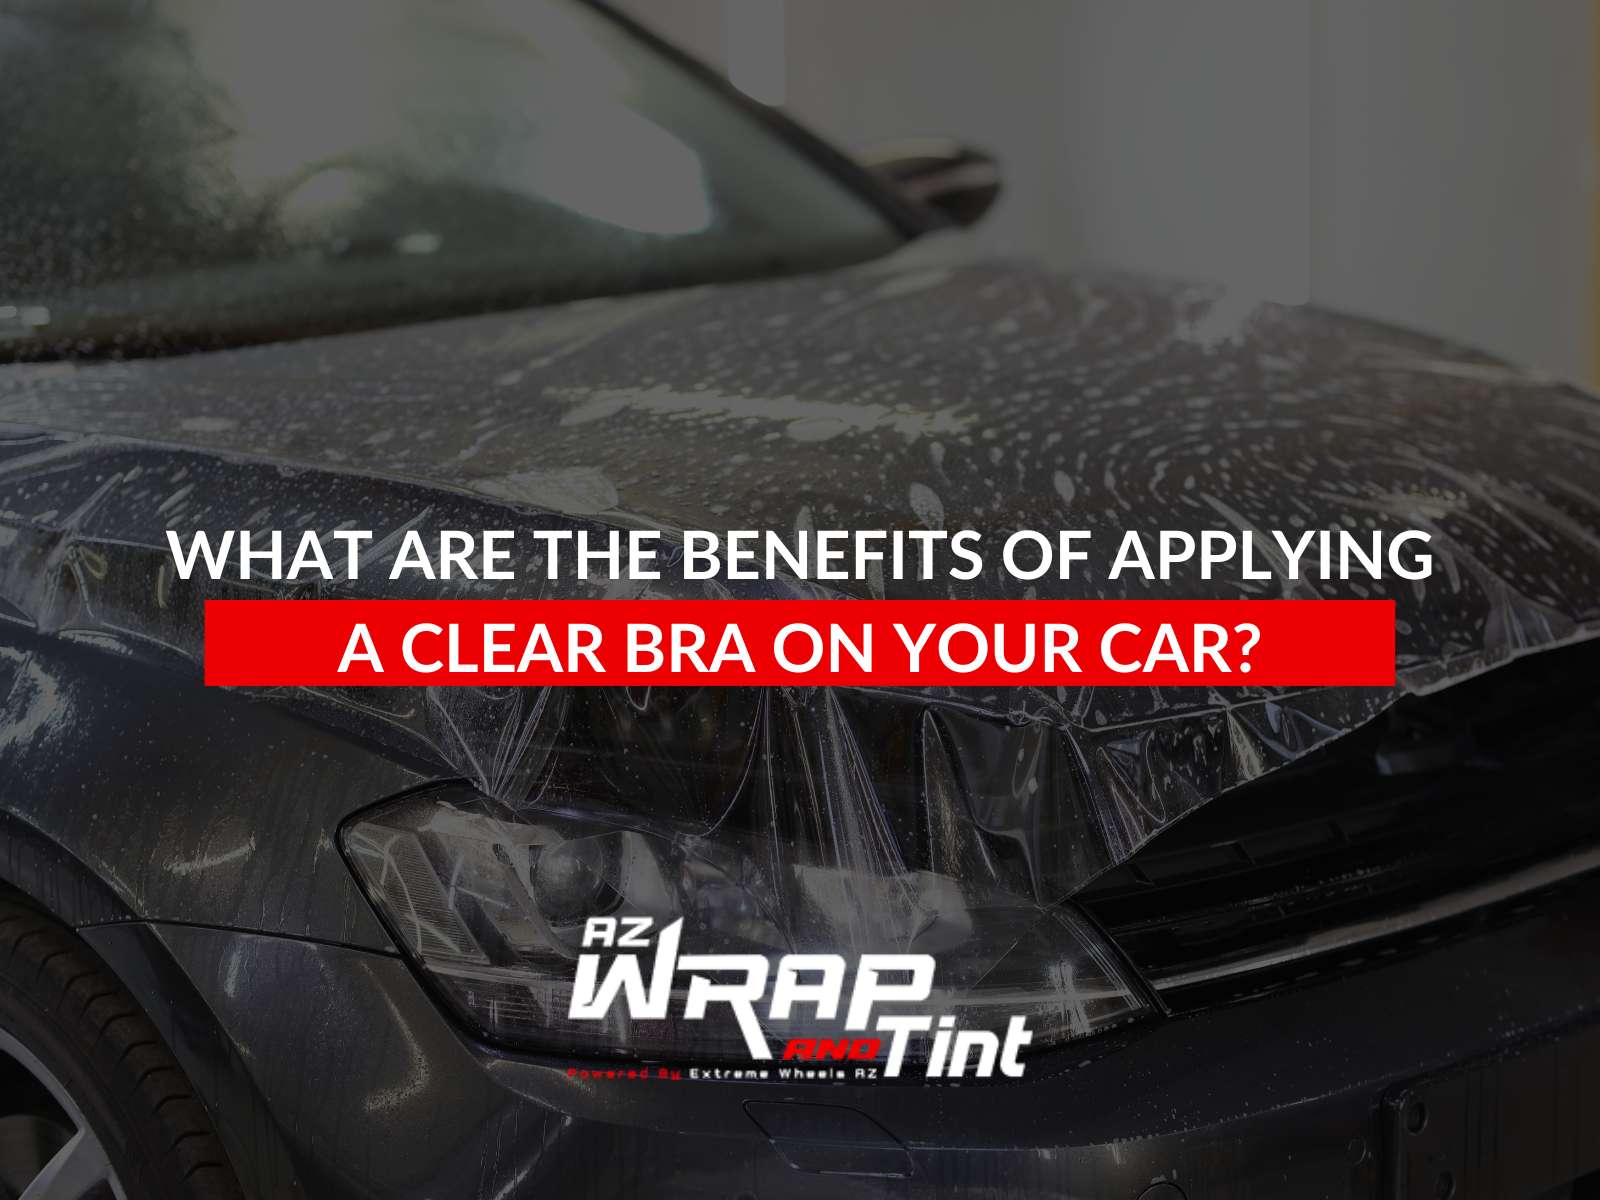 What Are The Benefits Of Applying A Clear Bra On Your Car?